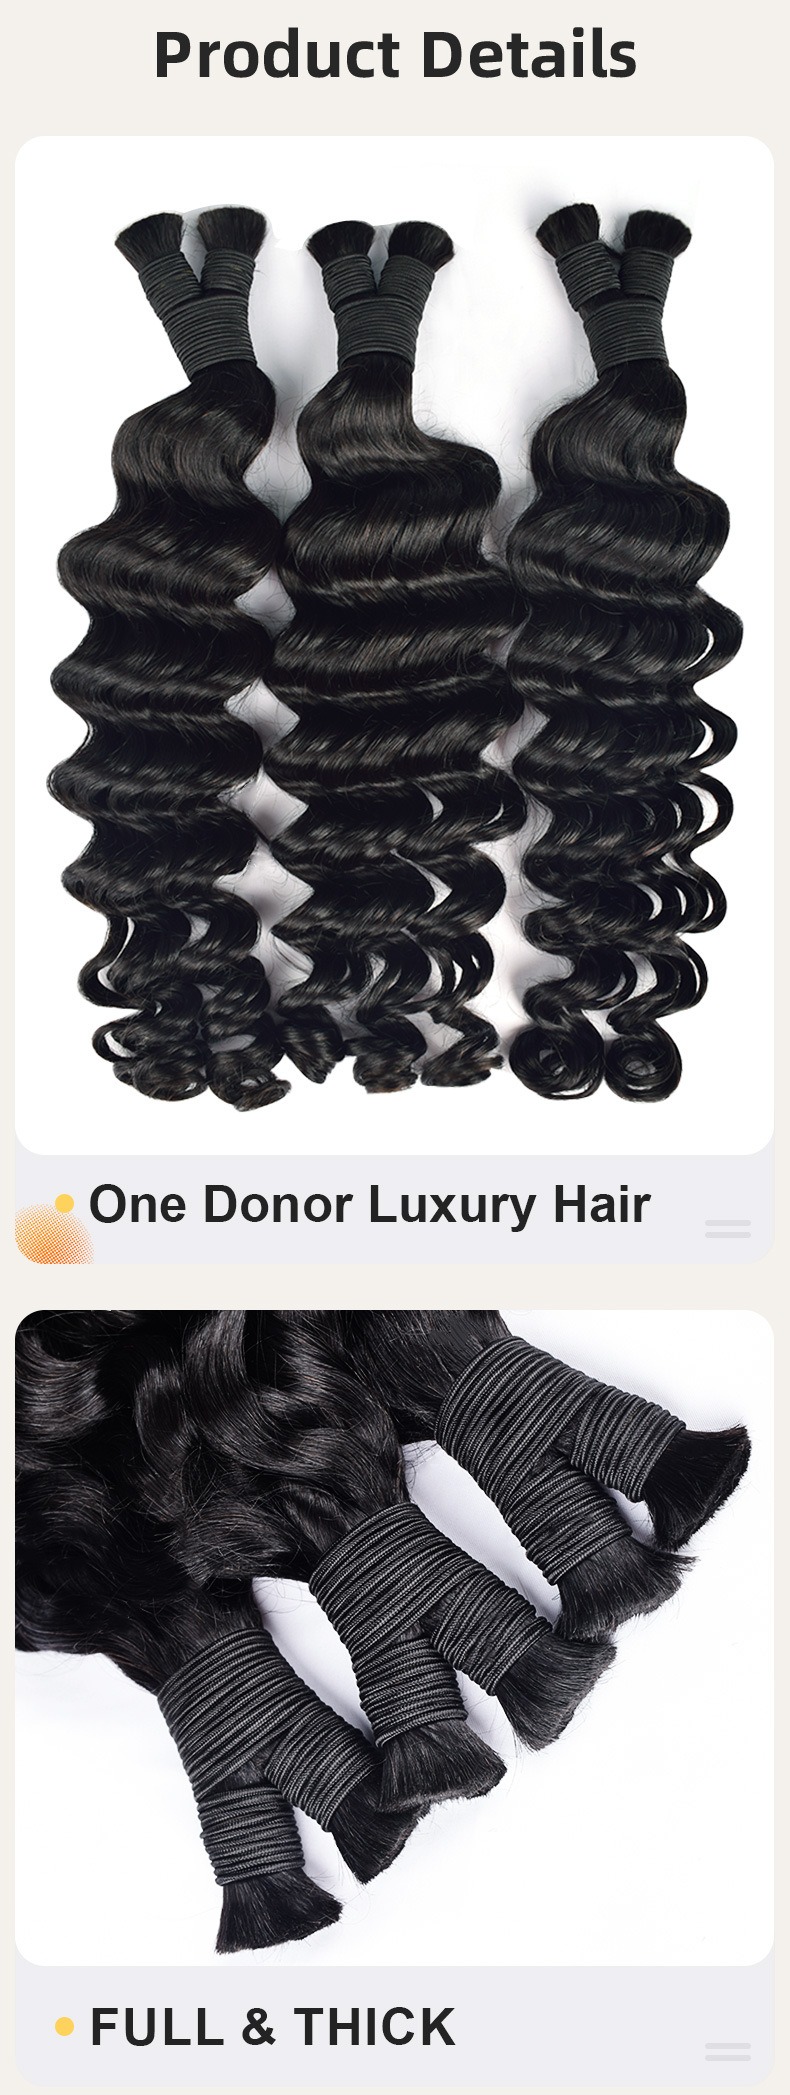 Transform your look with these real human hair extensions, featuring a loose deep wave pattern for bulk hair